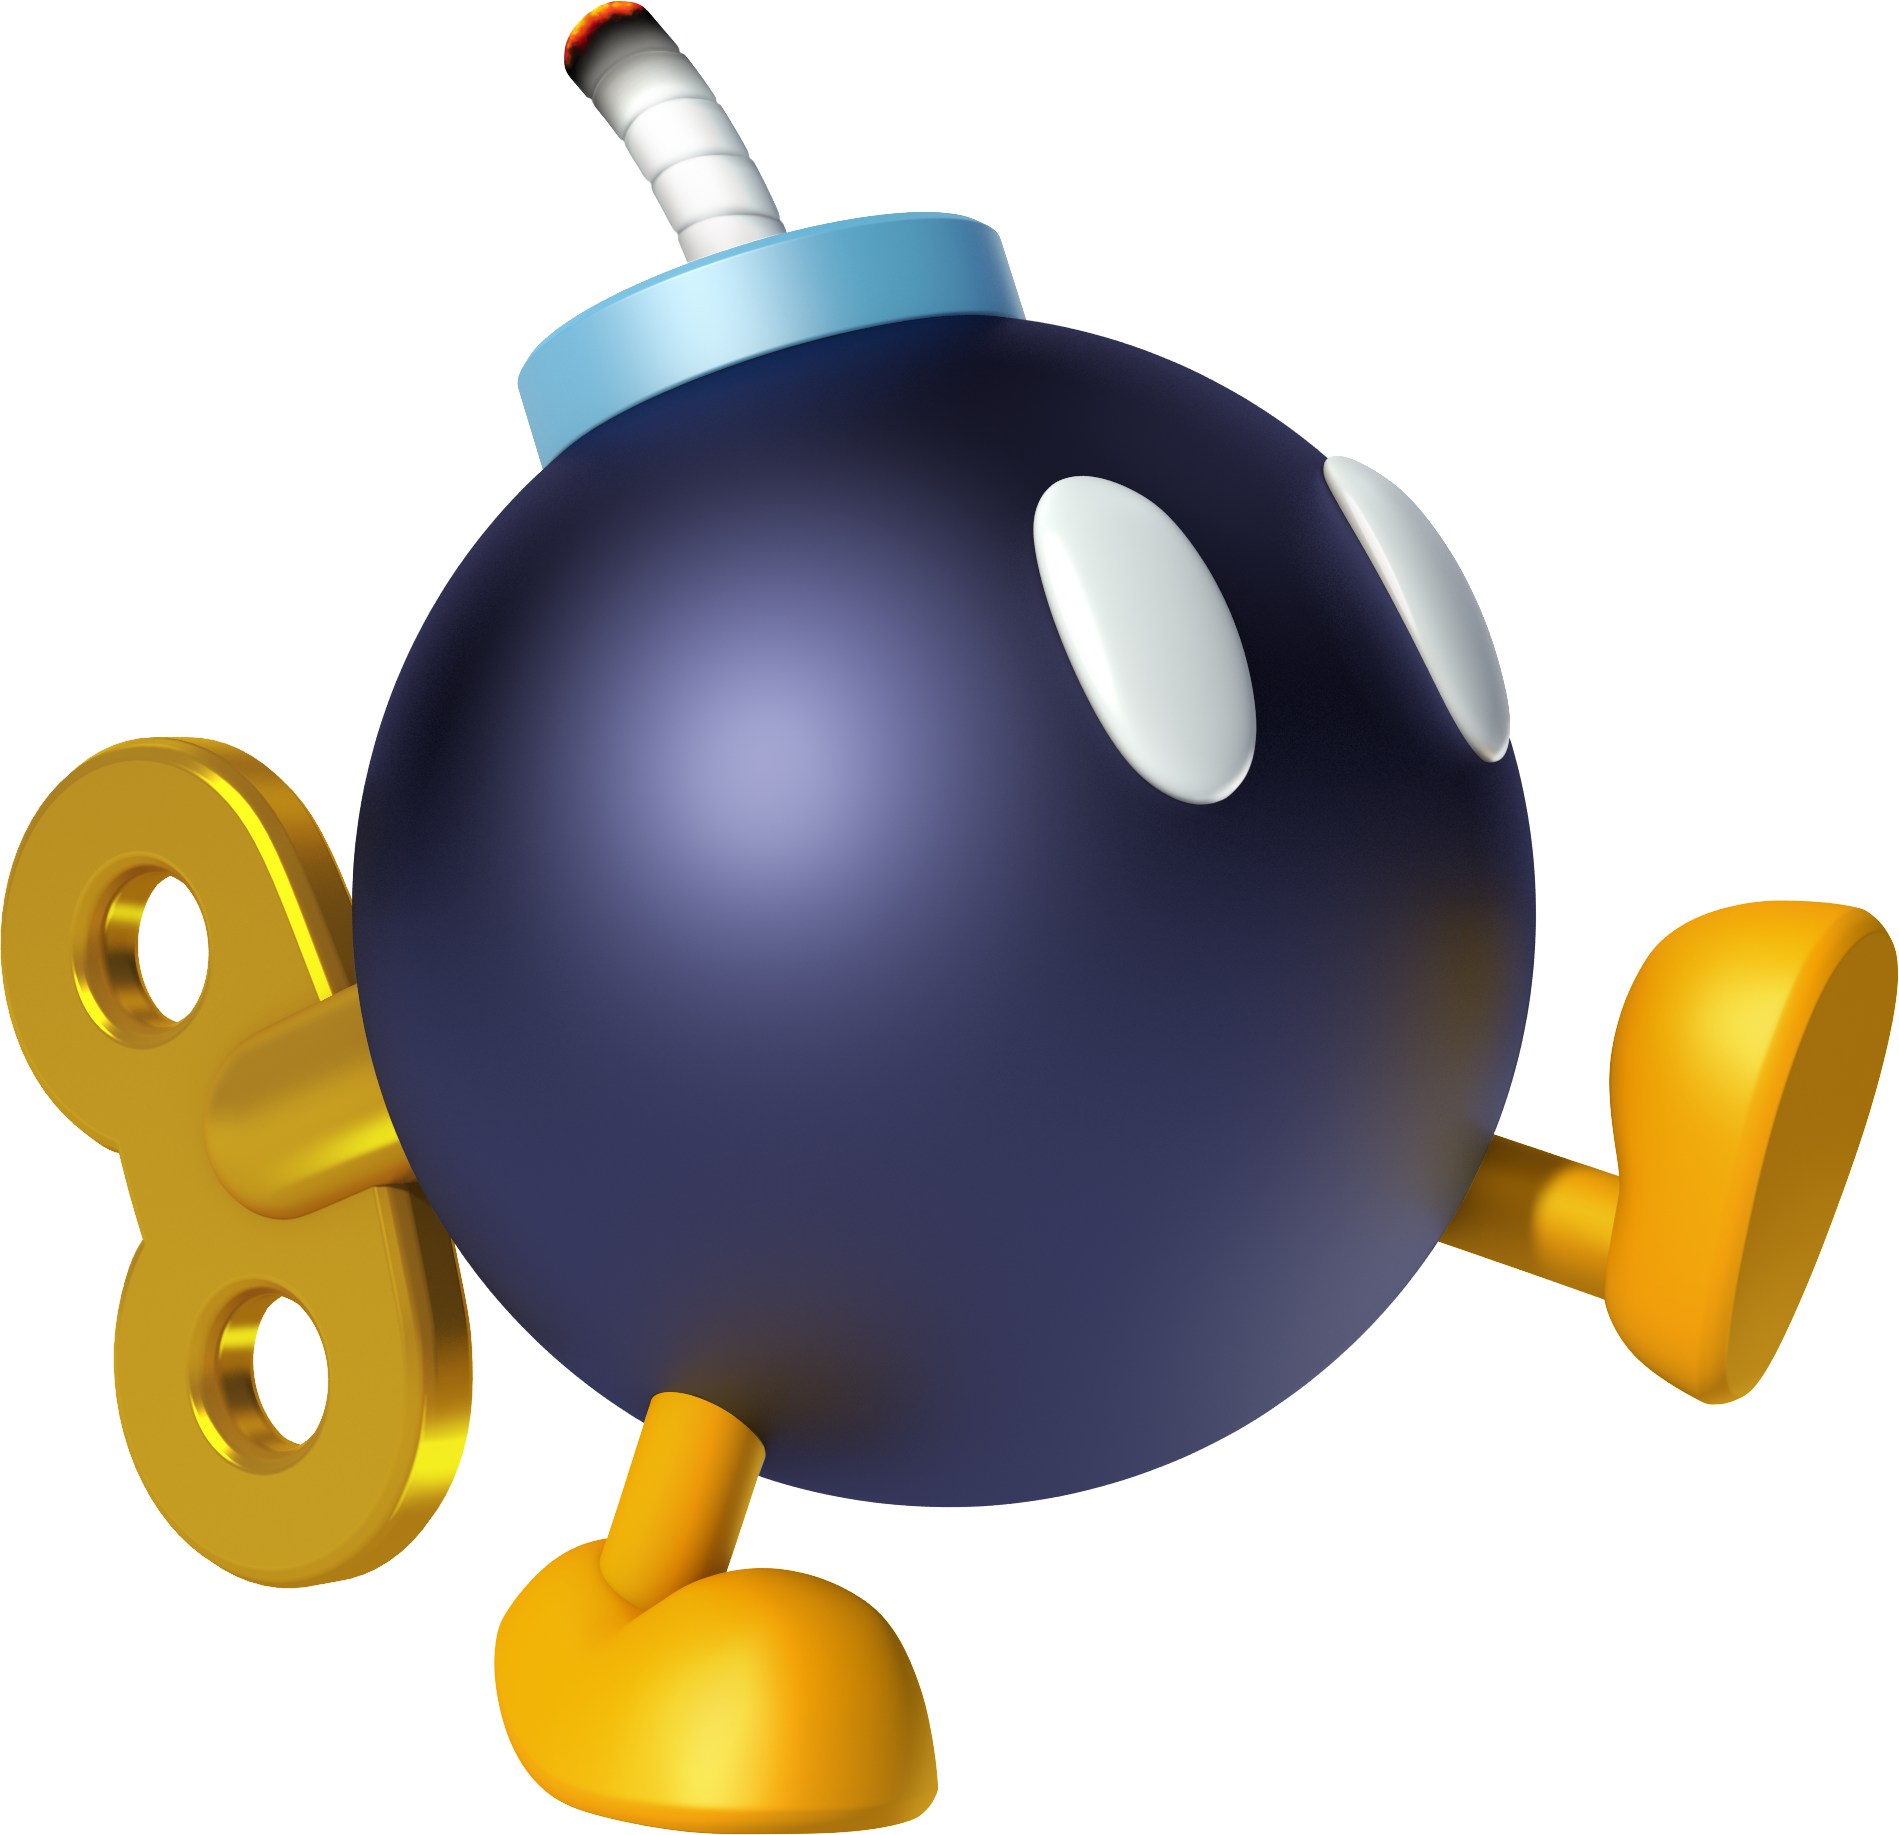 In The Mario Kart Series, The Bob-ombs Are A Weapon - Mario Kart 8 Bomb (1899x1835)